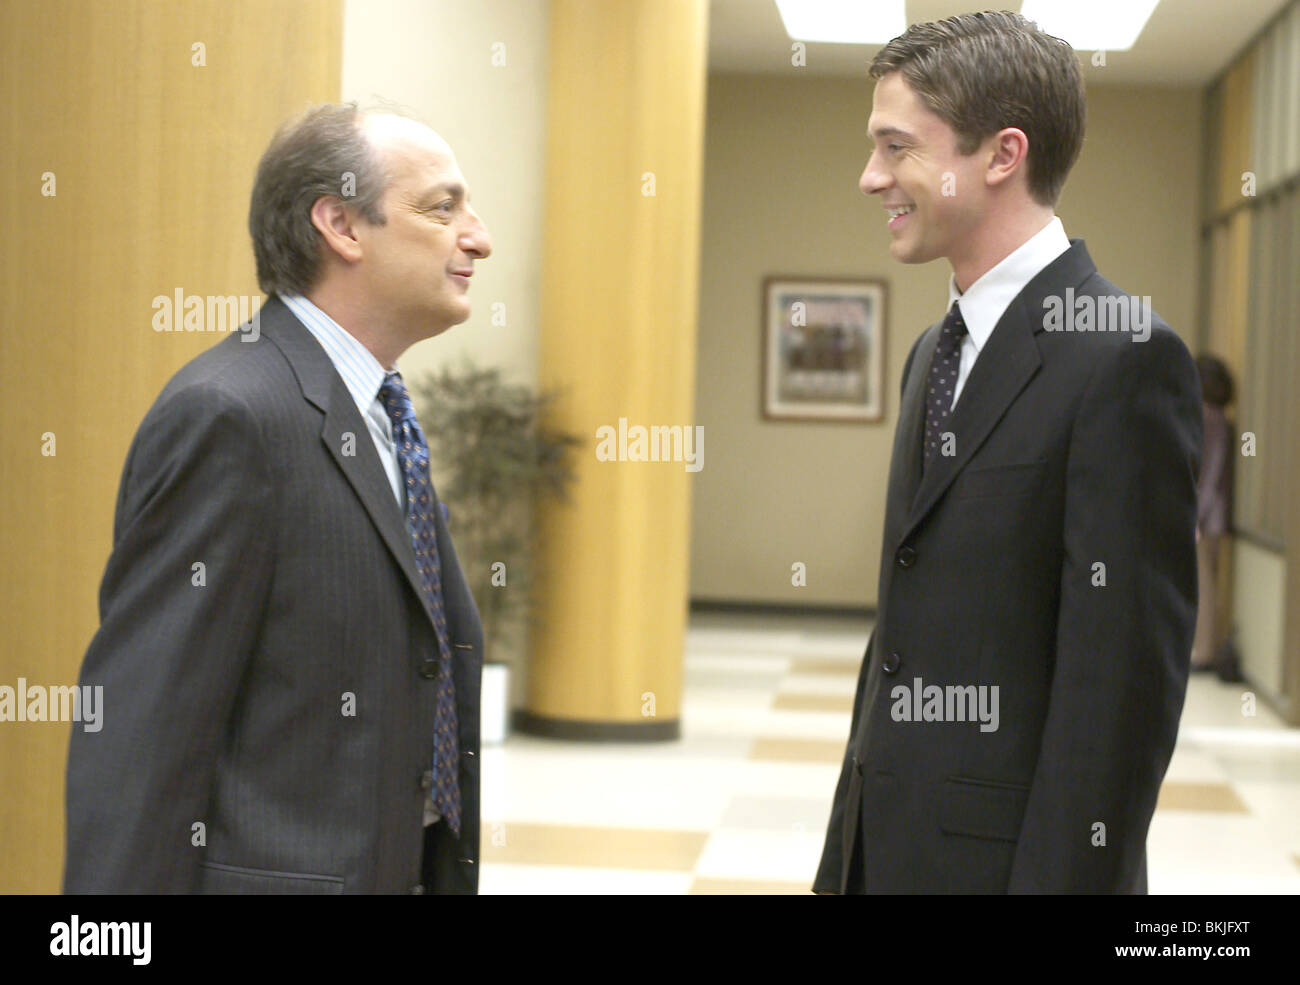 IN GOOD COMPANY (2004) DAVID PAYMER, TOPHER GRACE INGO 001 - AF Stock Photo